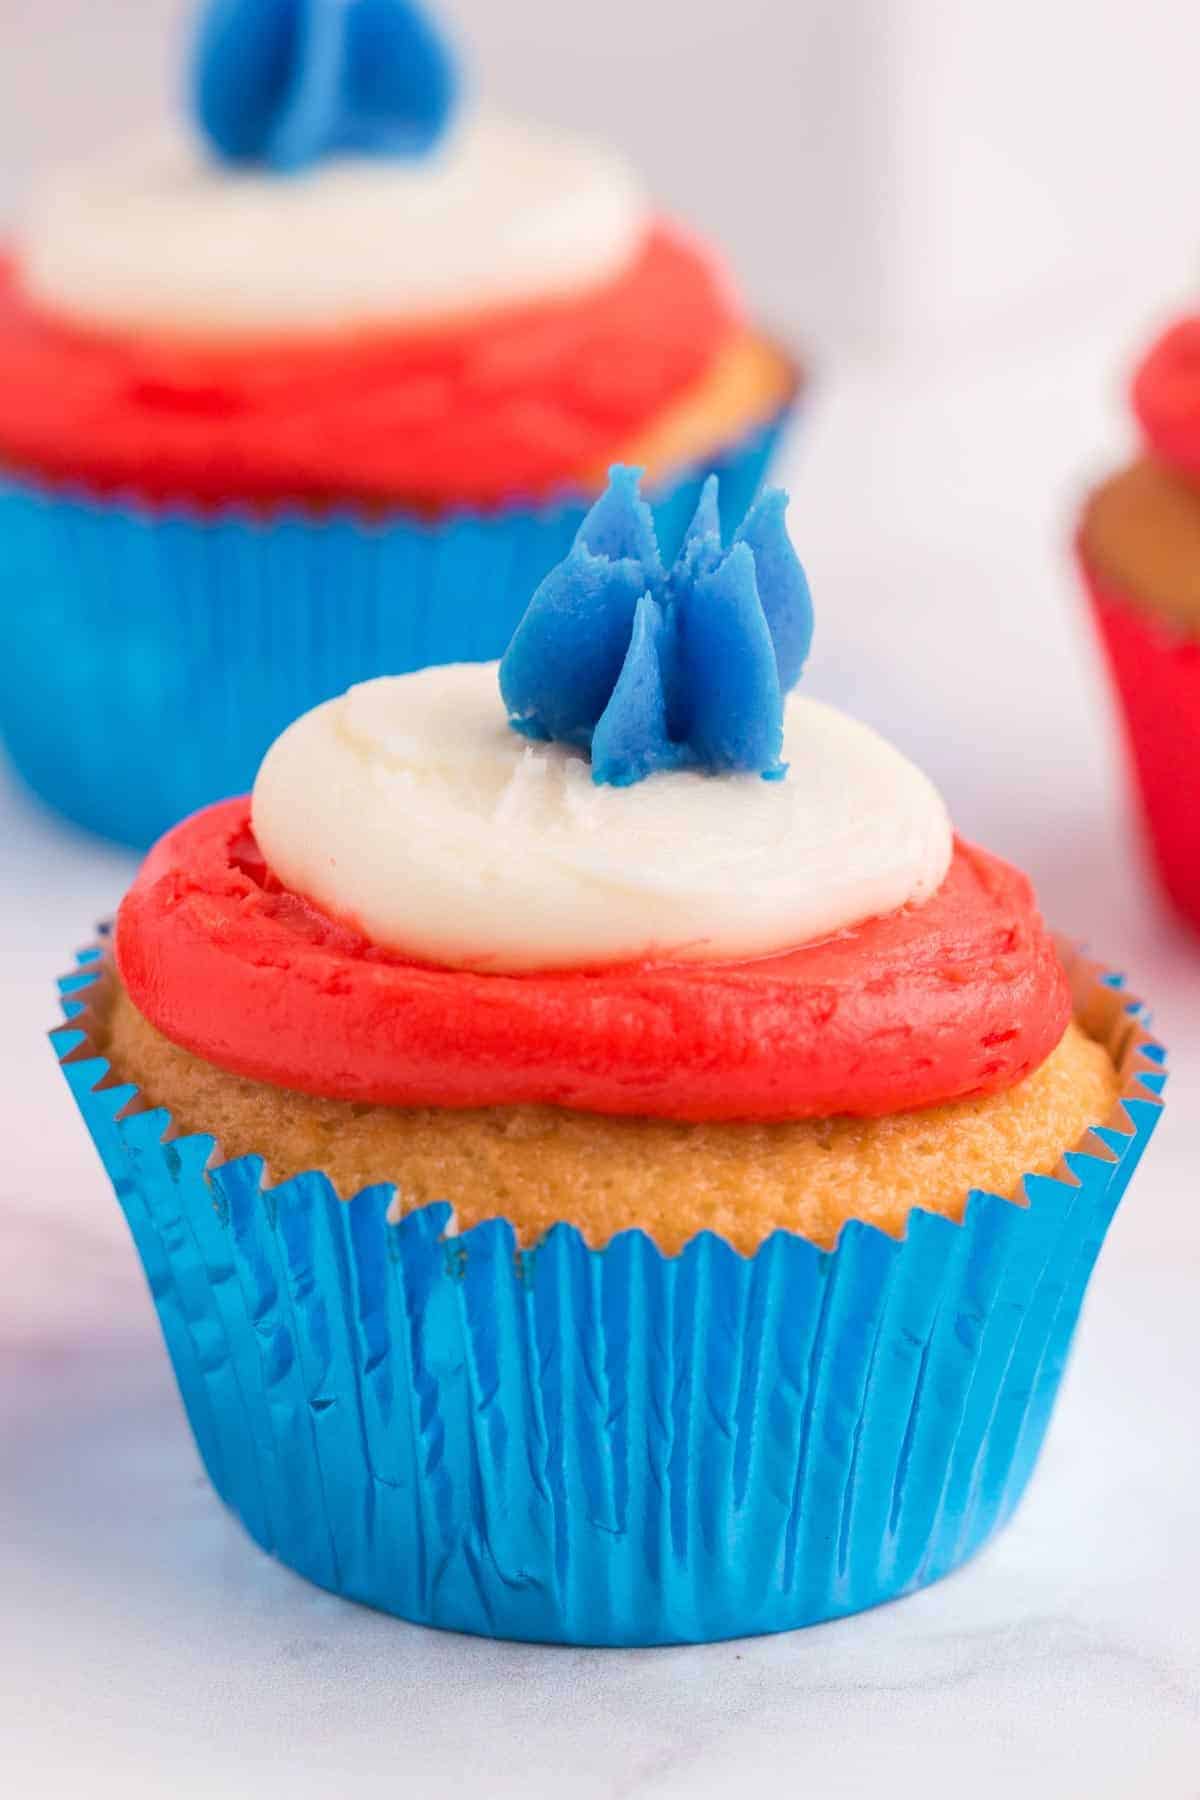 one fourth of july cupcake with a layer of red, a layer of white and a piped star of blue frosting in a blue foil liner